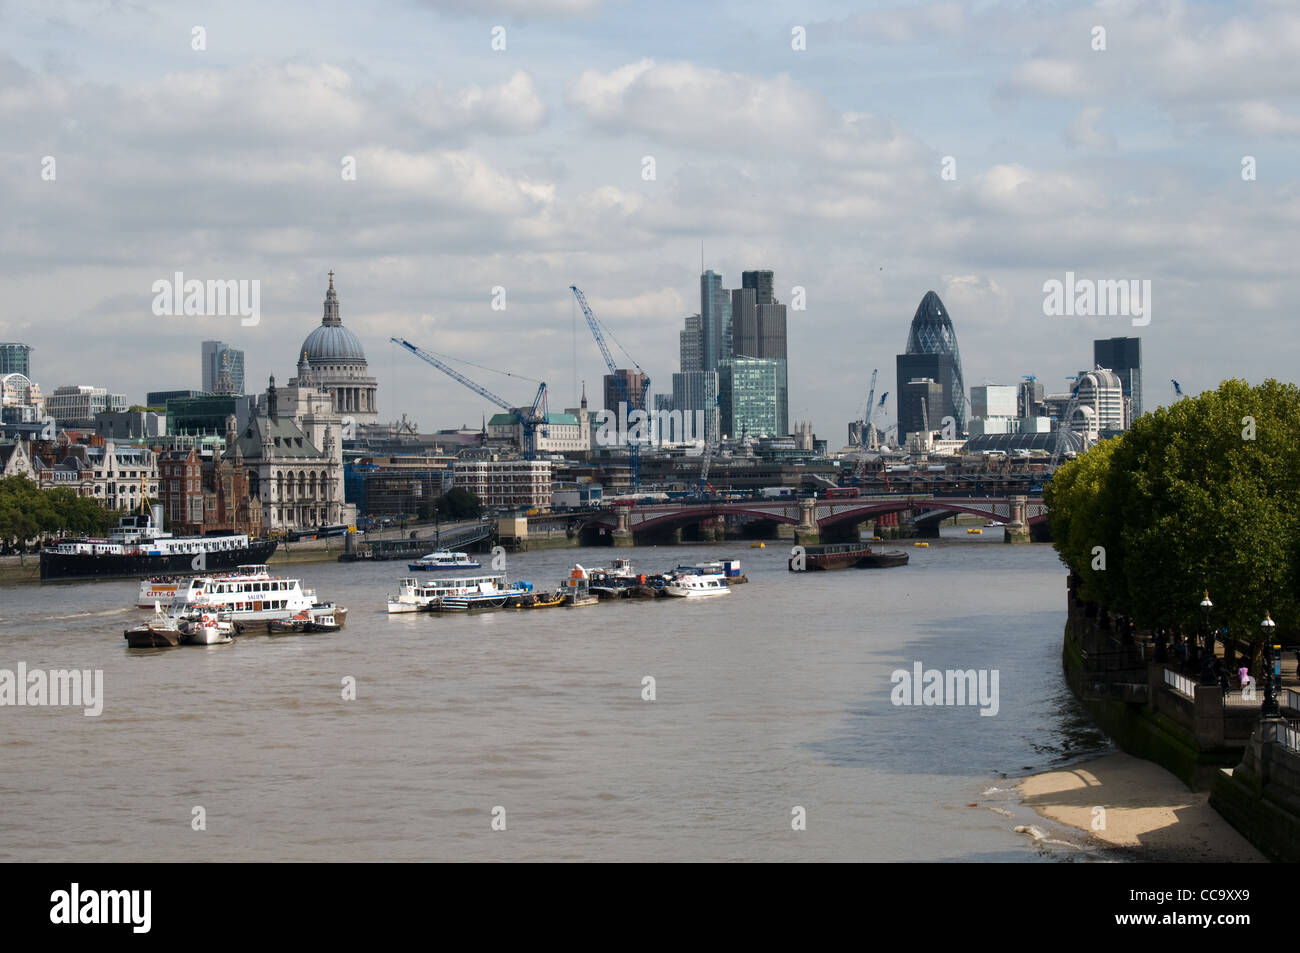 The view from Waterloo Bridge towards St Paul's  Cathedral and the tall buildings in the city of London Stock Photo